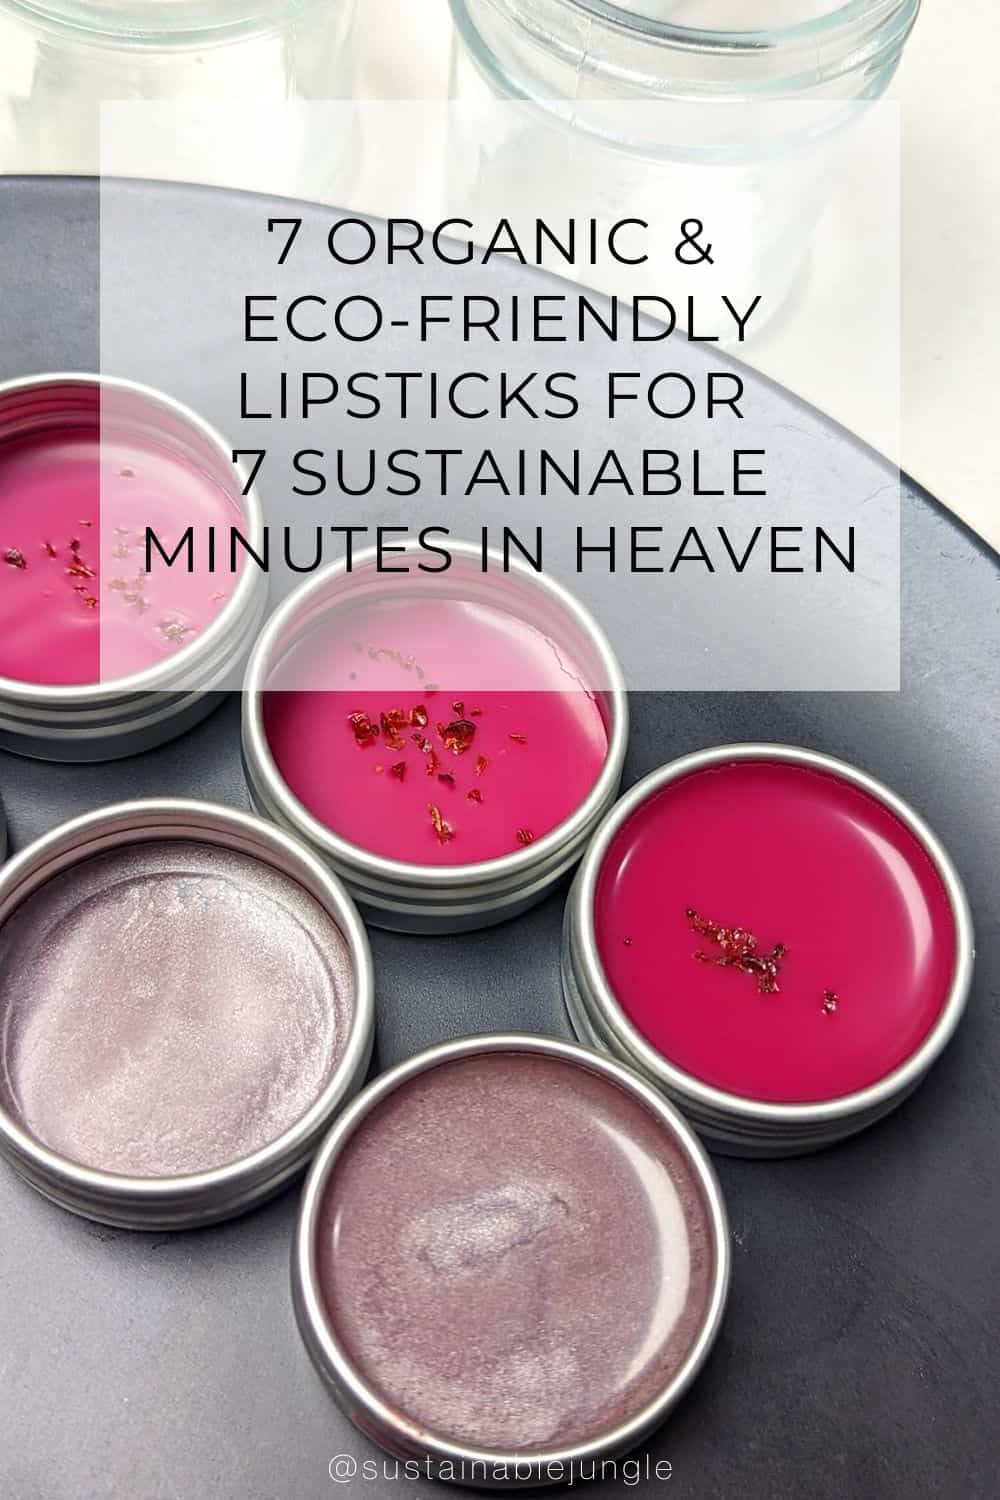 7 Organic & Eco-Friendly Lipsticks For 7 Sustainable Minutes In Heaven Image by Clean-Faced Cosmetics #ecofriendlylipstick #ecofriendlylipsticktube #naturalecofriendlylipstick #sustainablelipstick #sustainablelipstickpackaging #bestsustainablelipstick #sustainablejungle